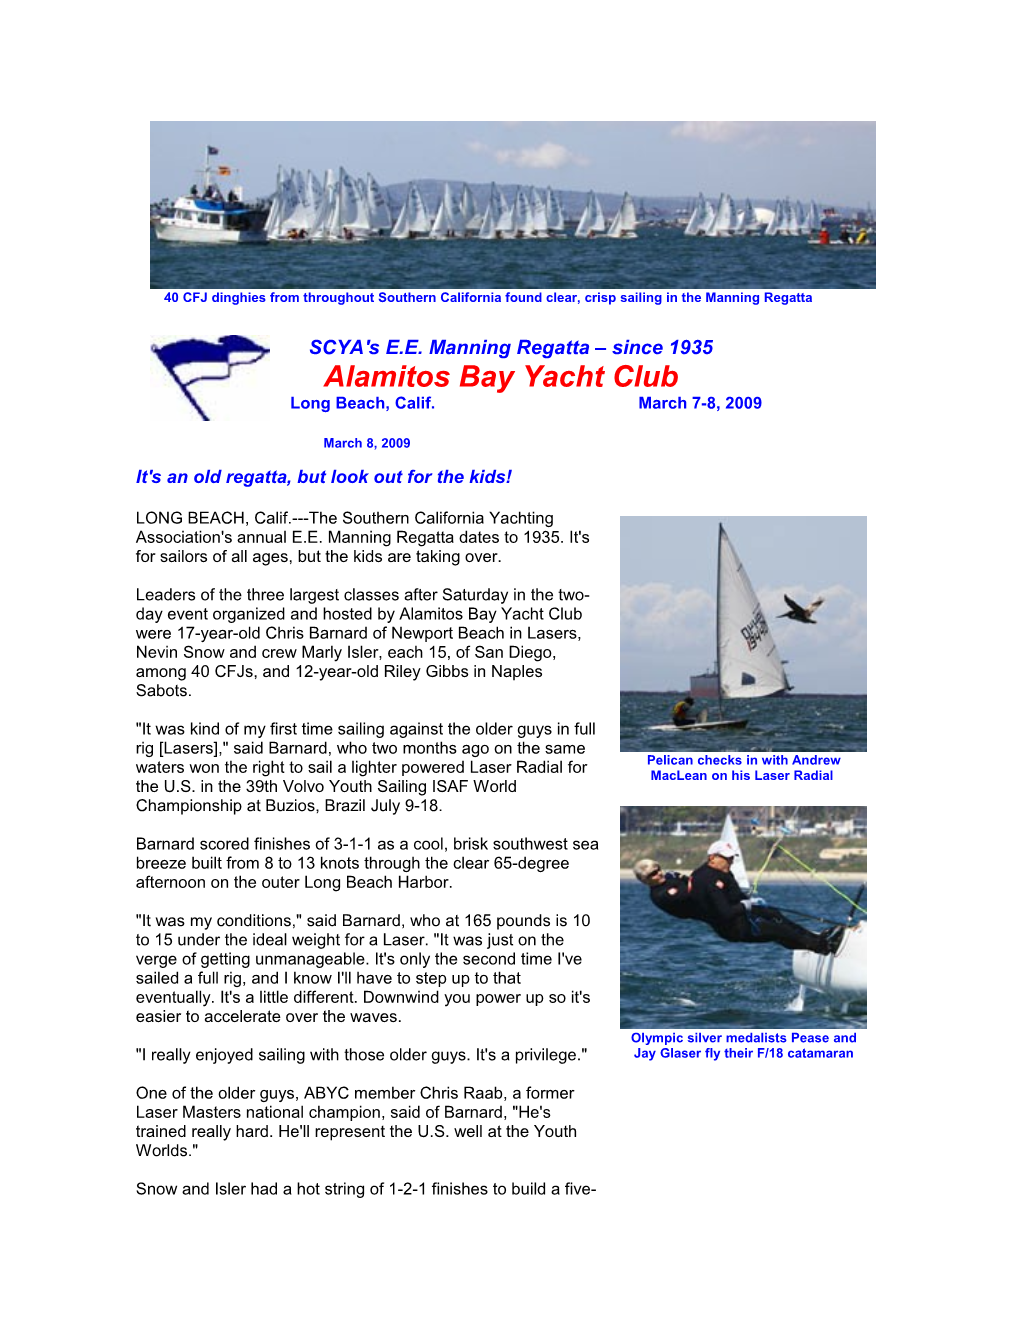 40 CFJ Dinghies from Throughout Southern California Found Clear, Crisp Sailing in The